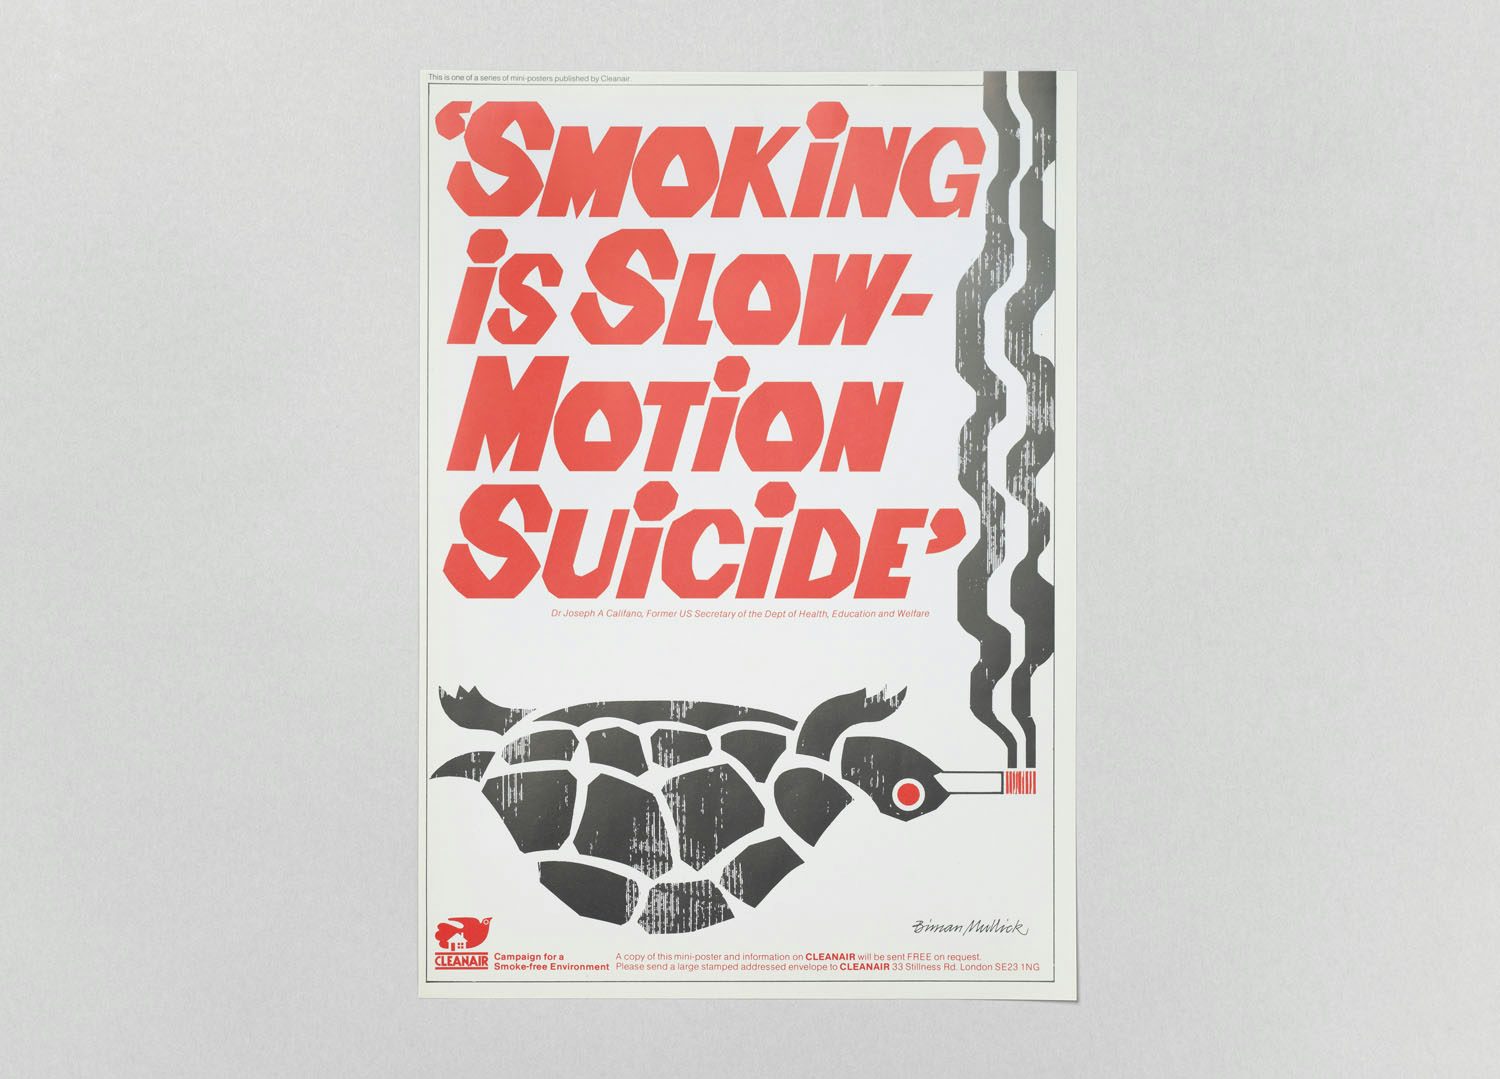 Anti-smoking poster by Biman Mullick / Cleanair. Images courtesy of the Wellcome Collection